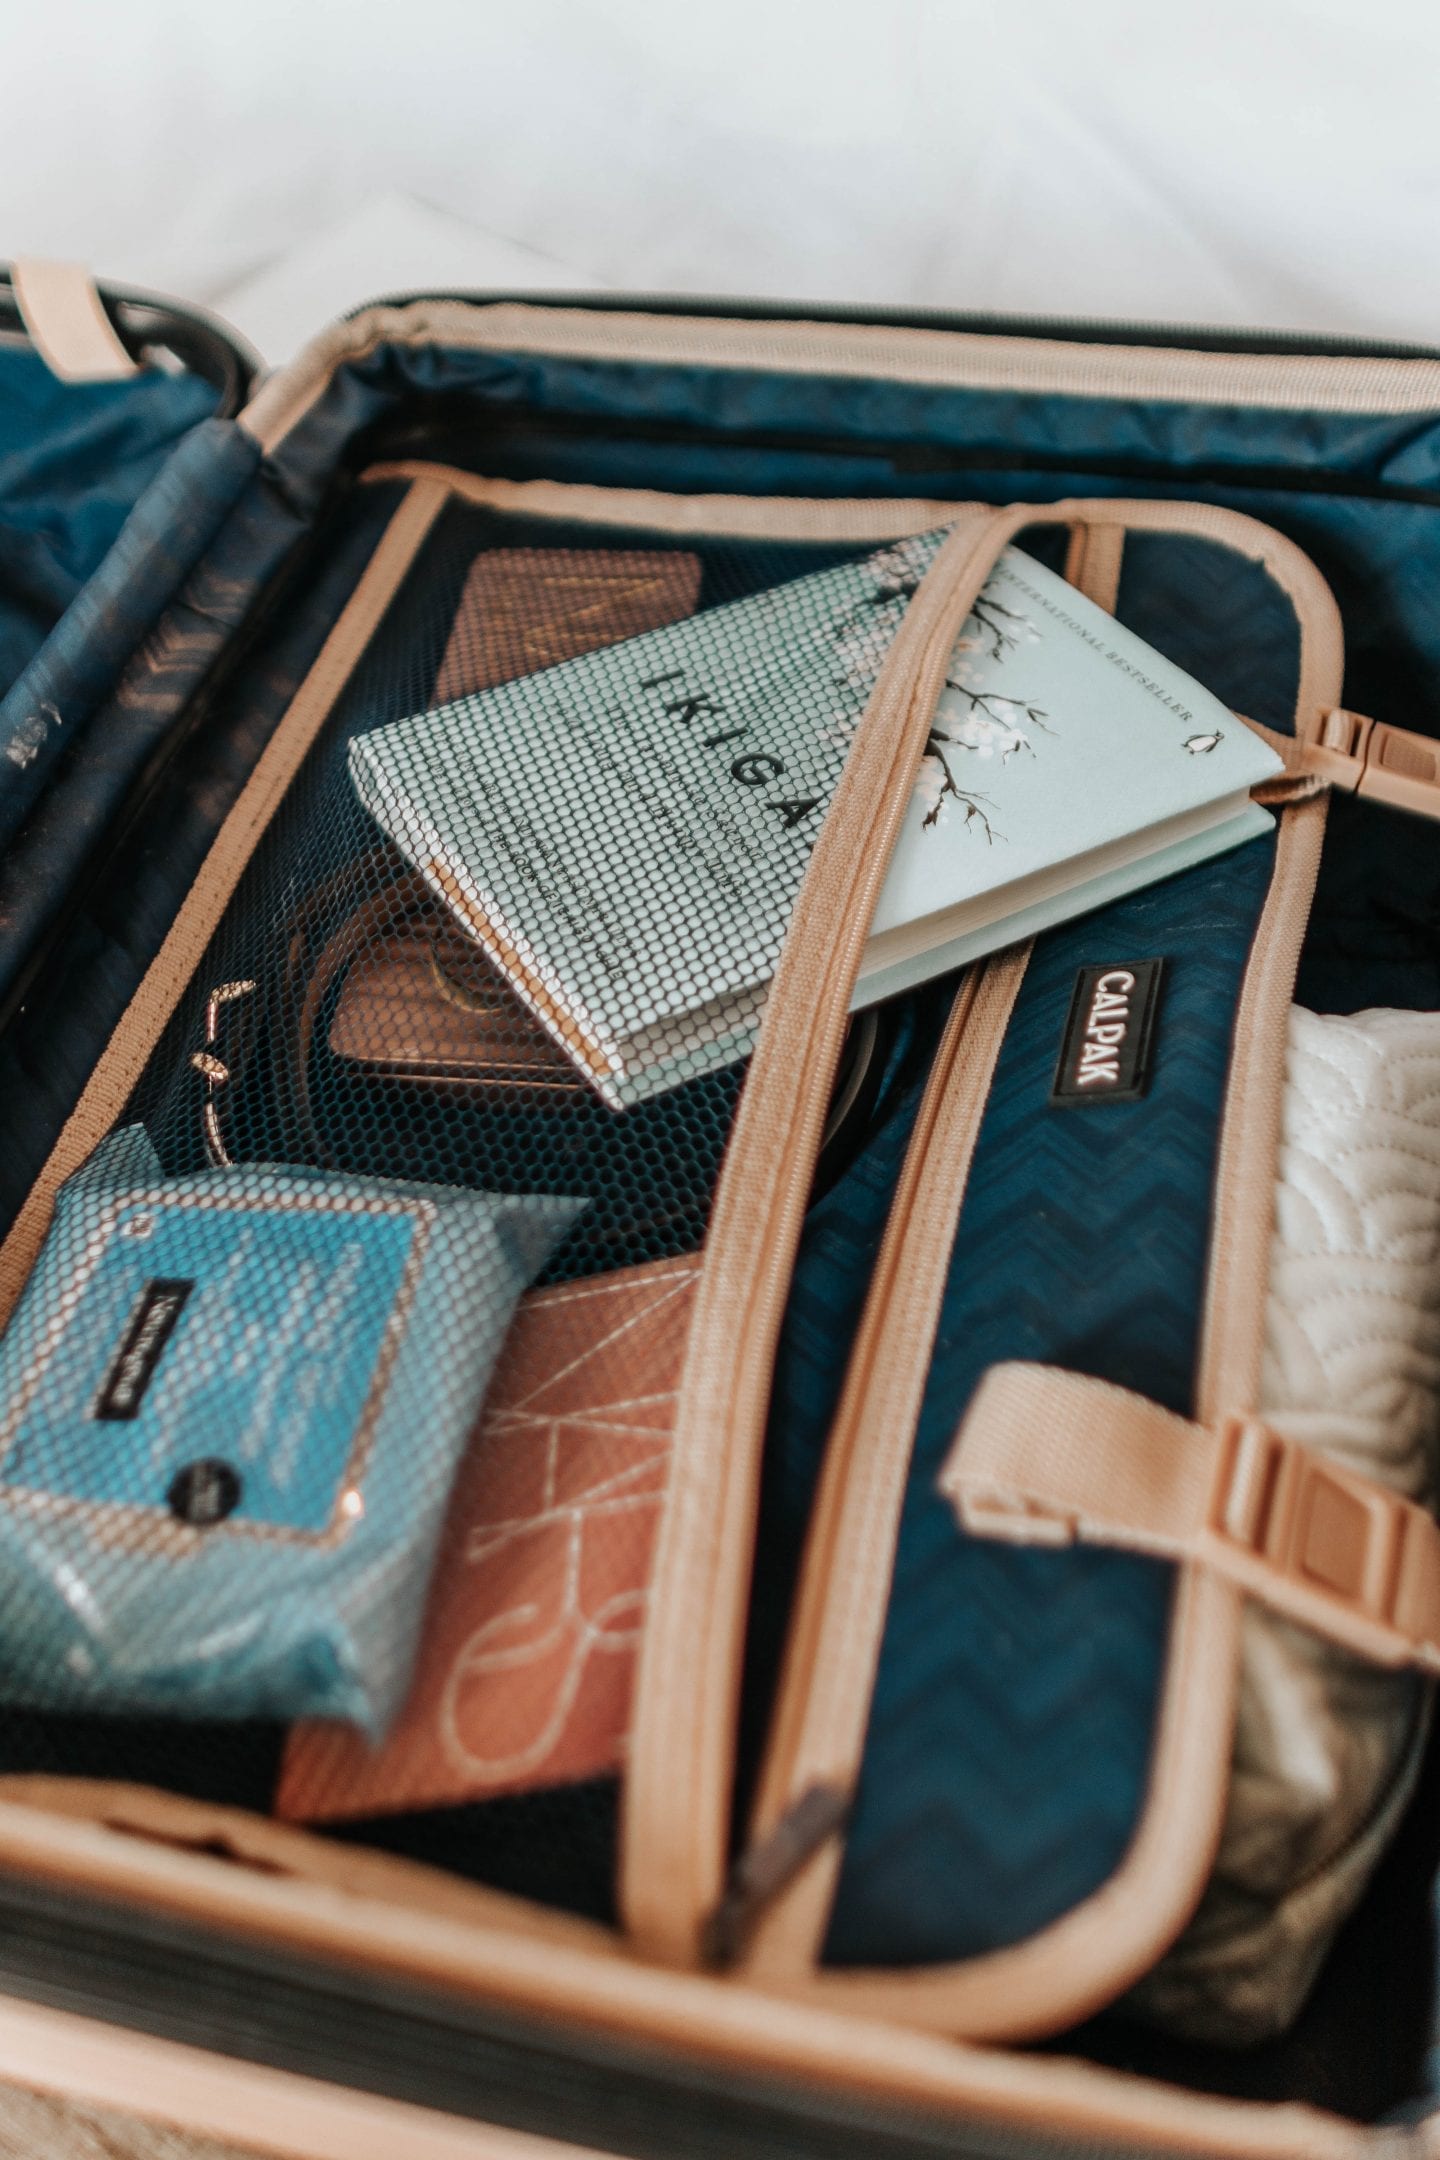 How to Pack a Suitcase - Tips From a Professional Organizer